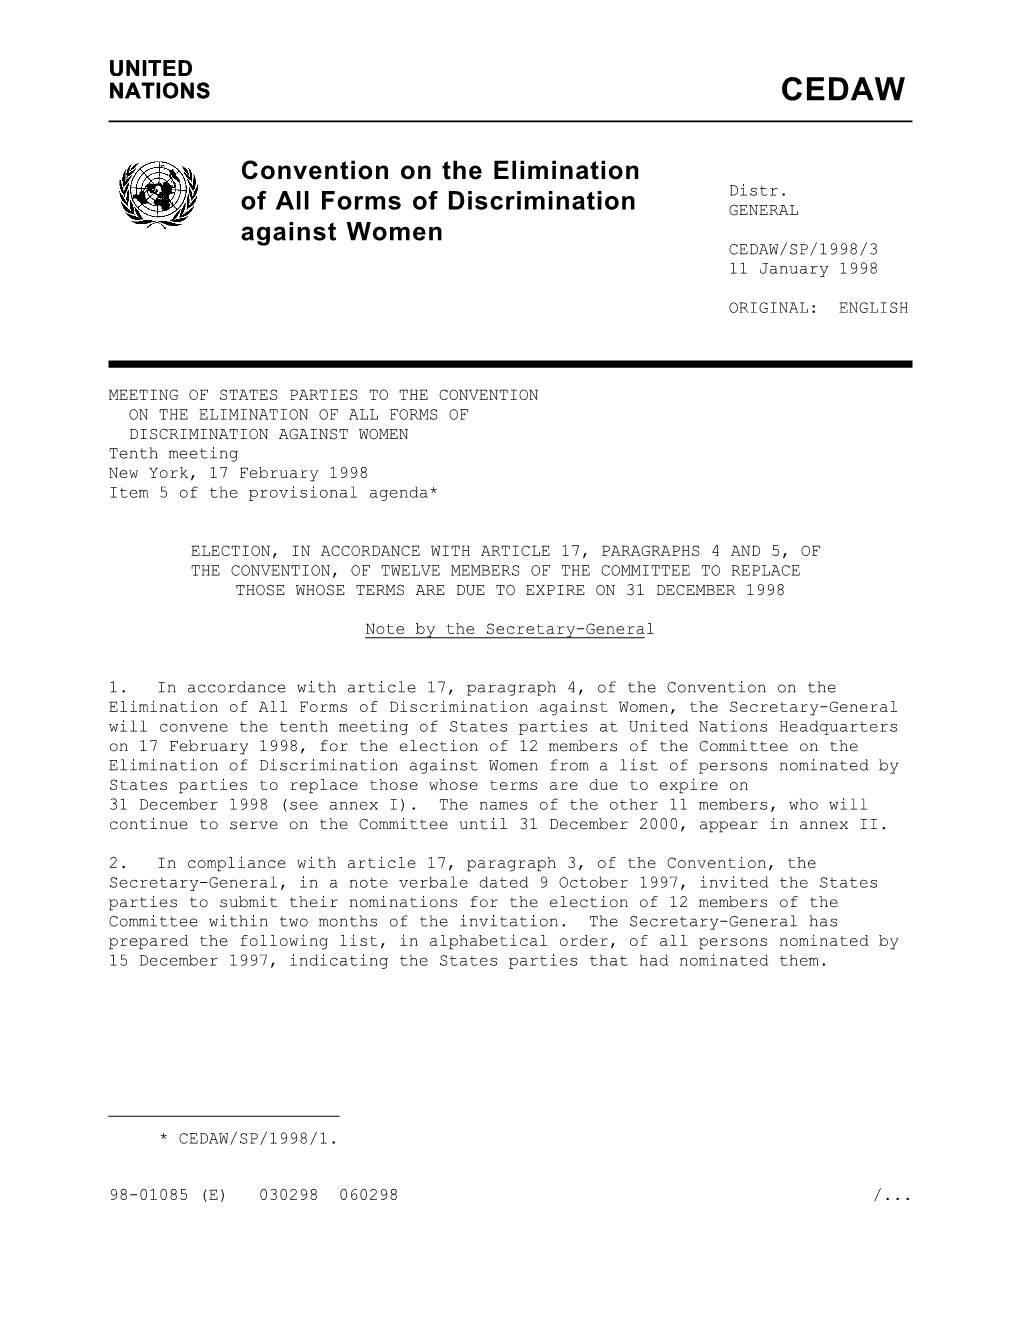 CONVENTION on the ELIMINATION of ALL FORMS of DISCRIMINATION AGAINST WOMEN Tenth Meeting New York, 17 February 1998 Item 5 of the Provisional Agenda*